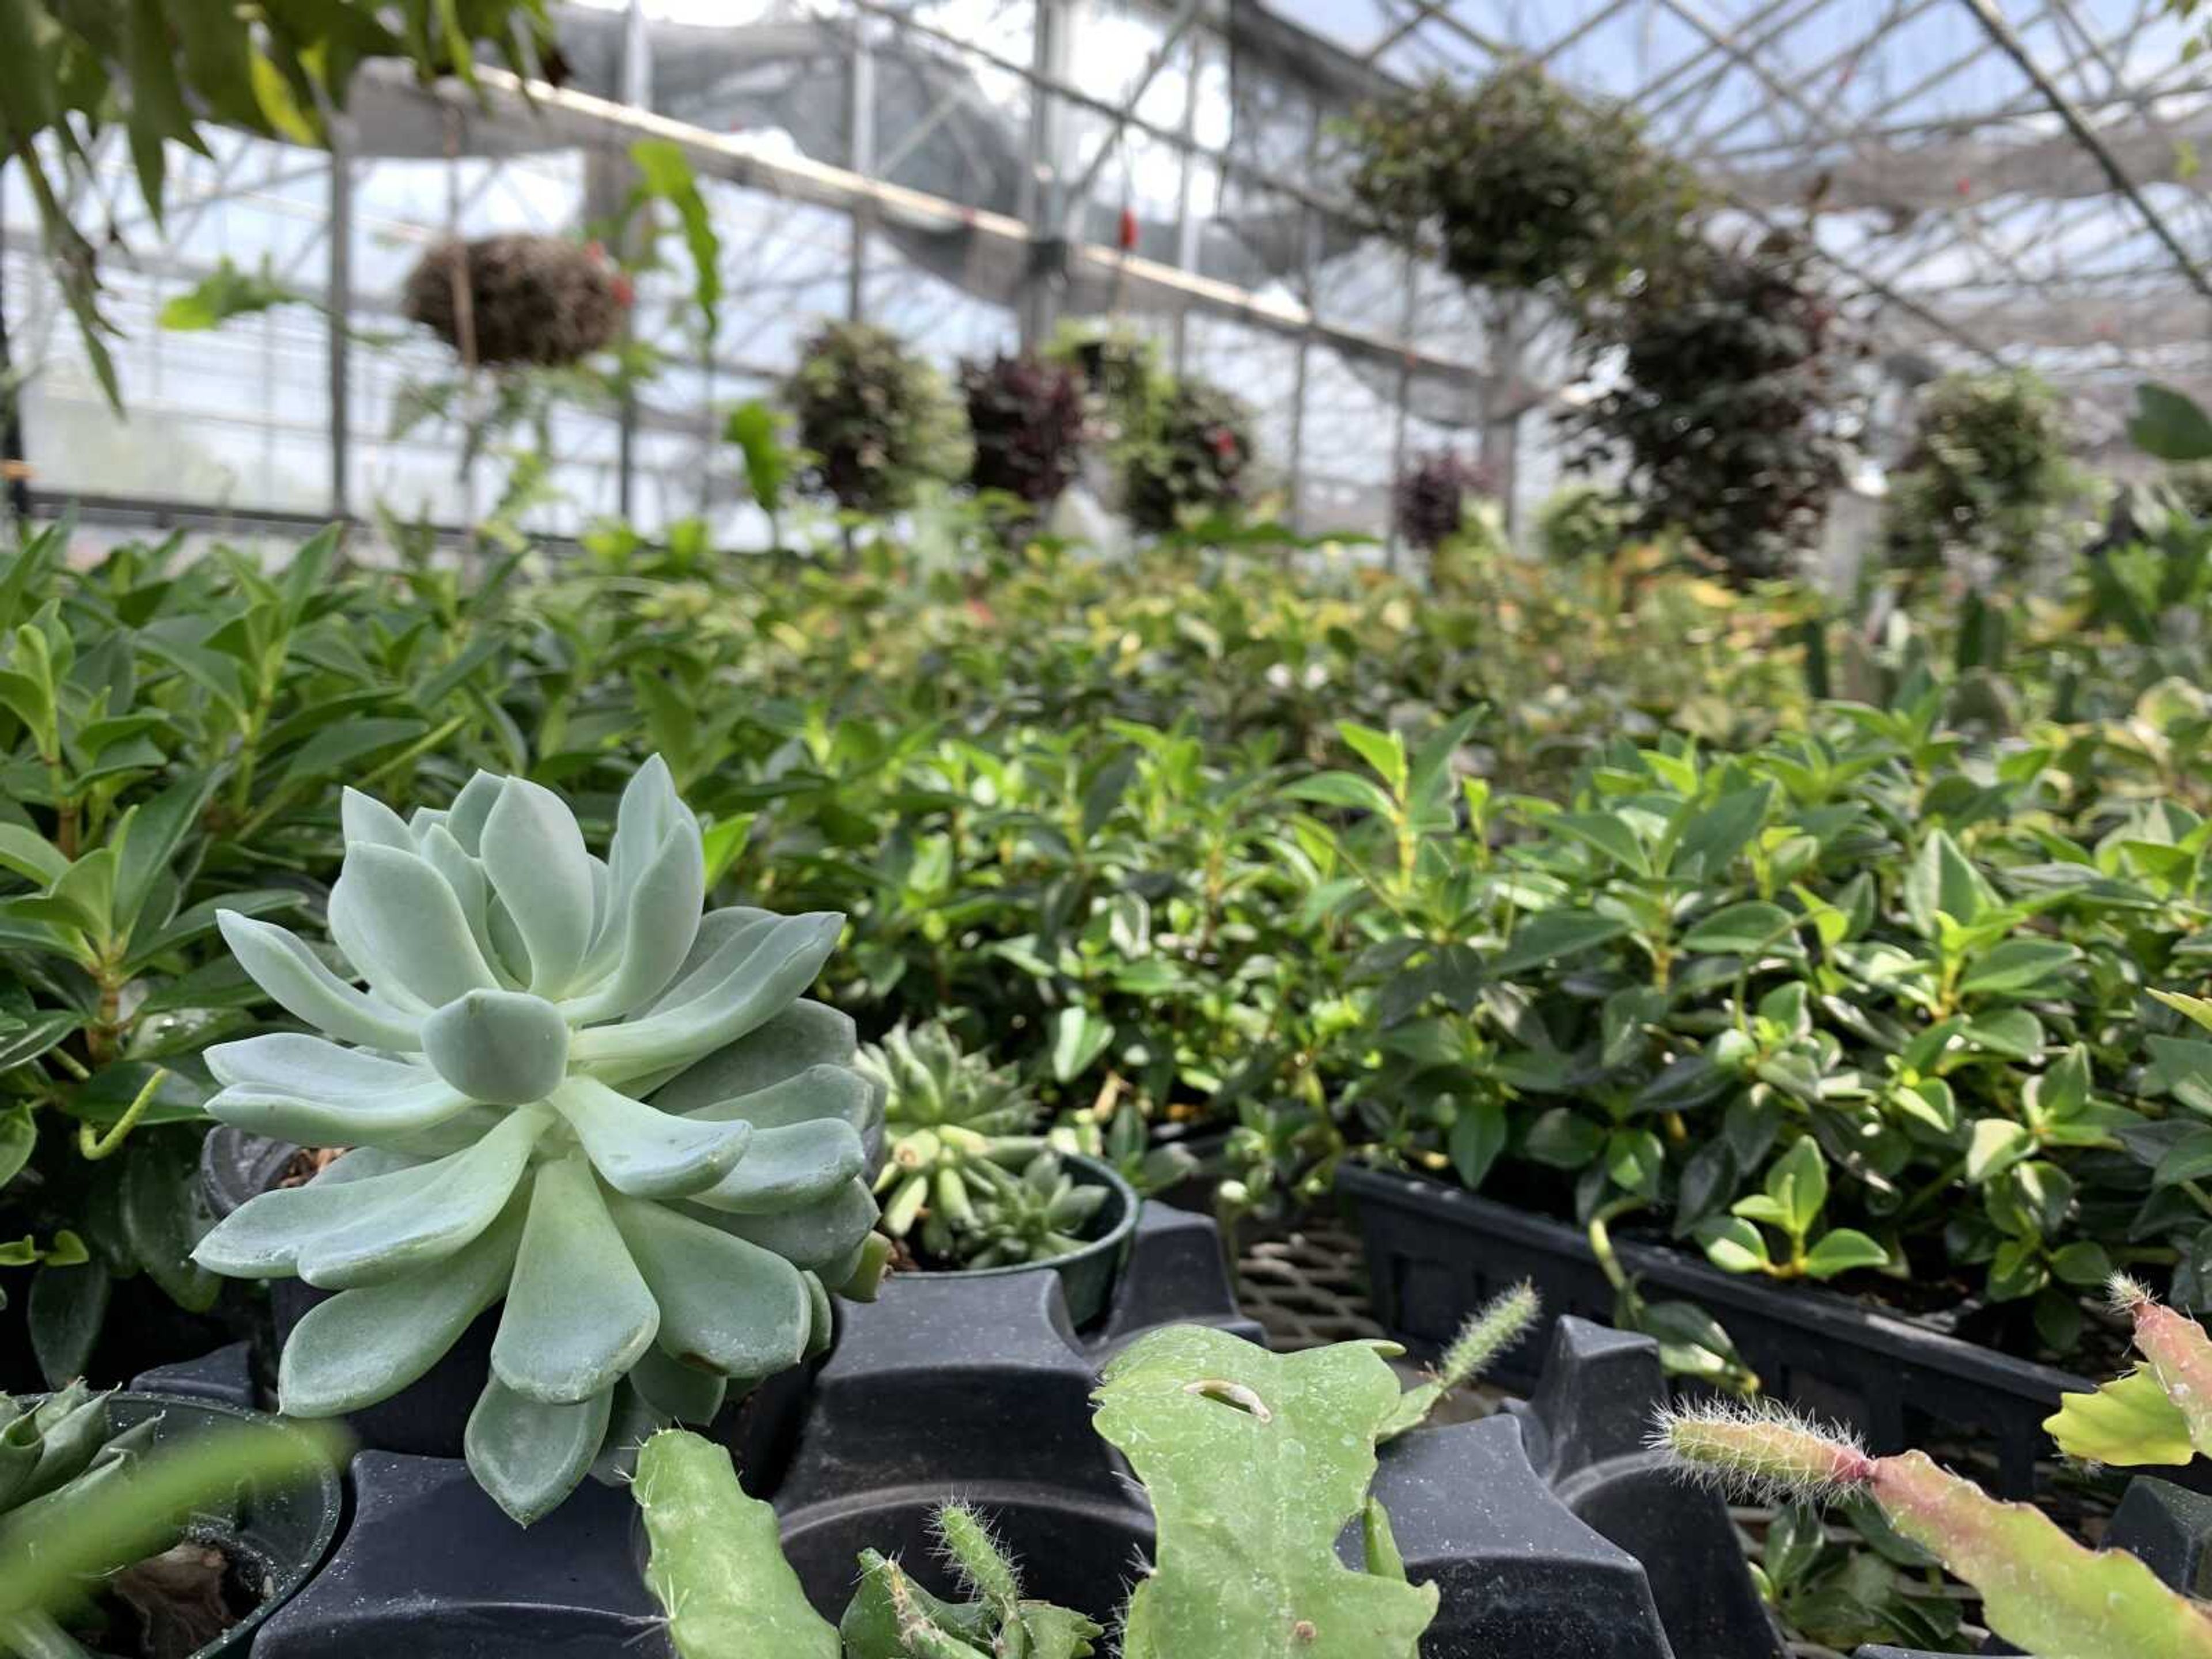 The Charles Hutson Horticulture Greenhouse sees many Southeast students looking for plants to keep in their dorms. Most walk out with a species of succulent. 